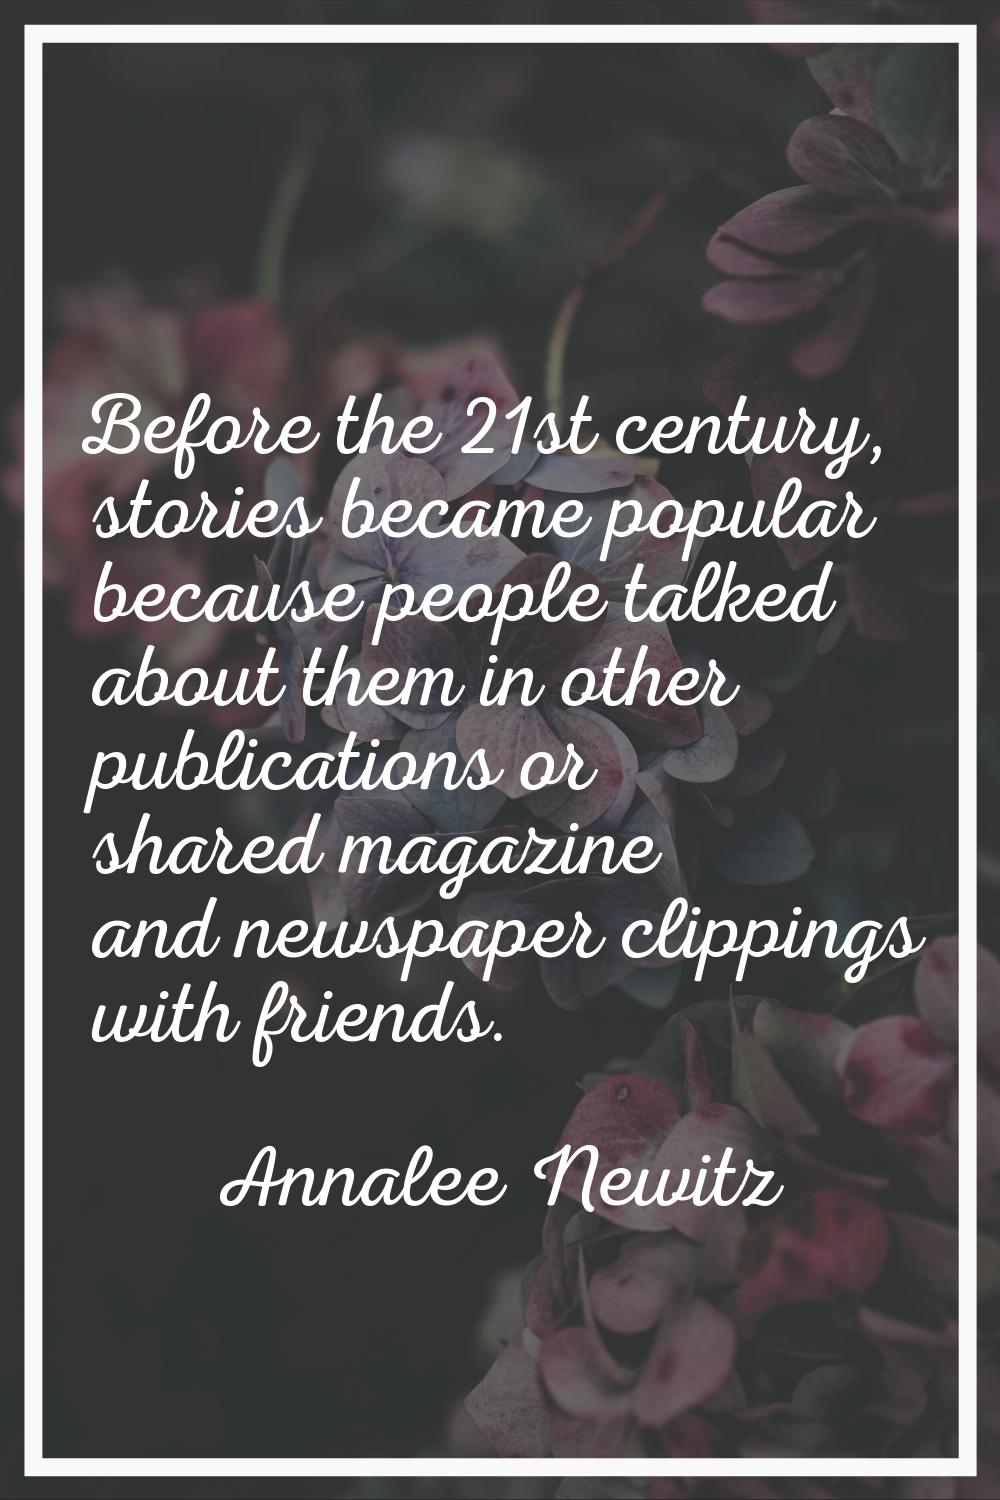 Before the 21st century, stories became popular because people talked about them in other publicati